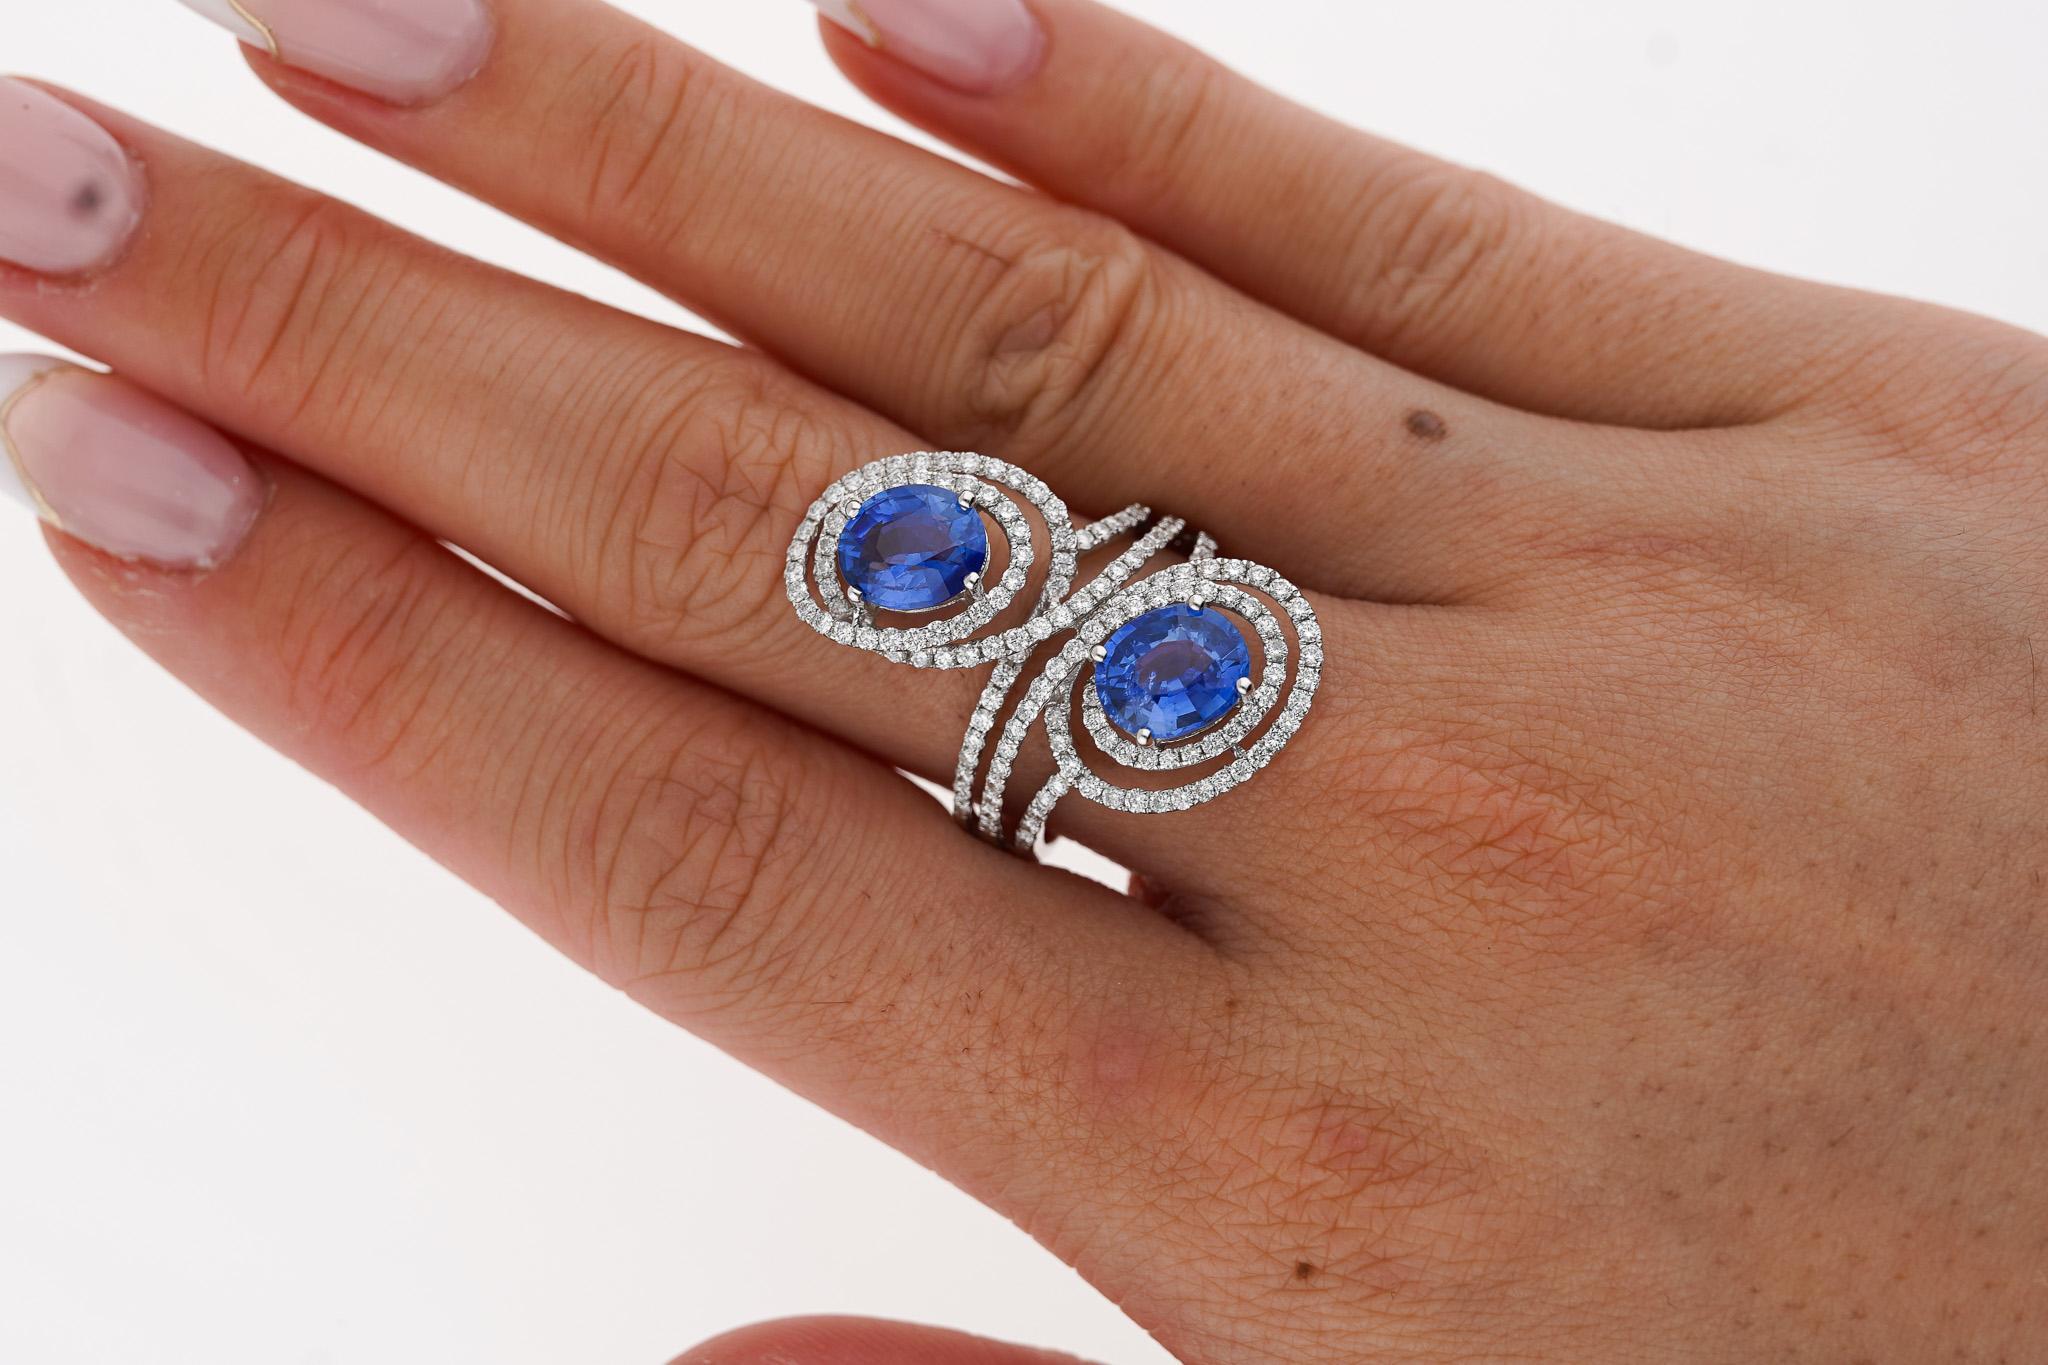 3.41 carat oval cut blue sapphire and diamond ring. Adorned with diamonds that total 1.10 carats and the ring goes horizontally on the finger create this east west setting. The diamonds are F-G color with VS2-SI1 clarity. The sapphires and diamonds